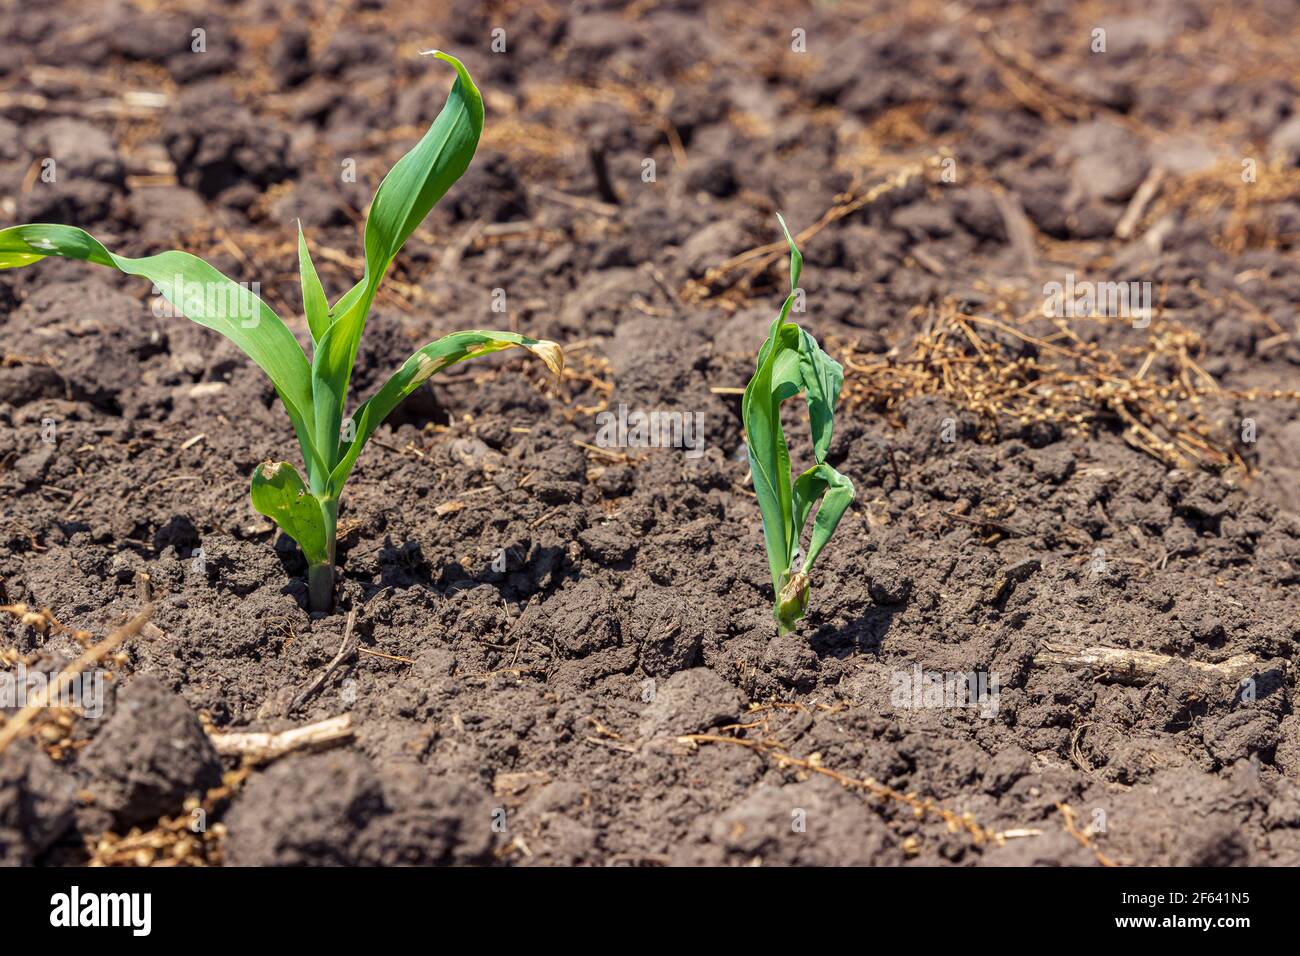 Young corn plant with leaf deformity or buggy whipping. Concept of corn health, stress and damage. Stock Photo